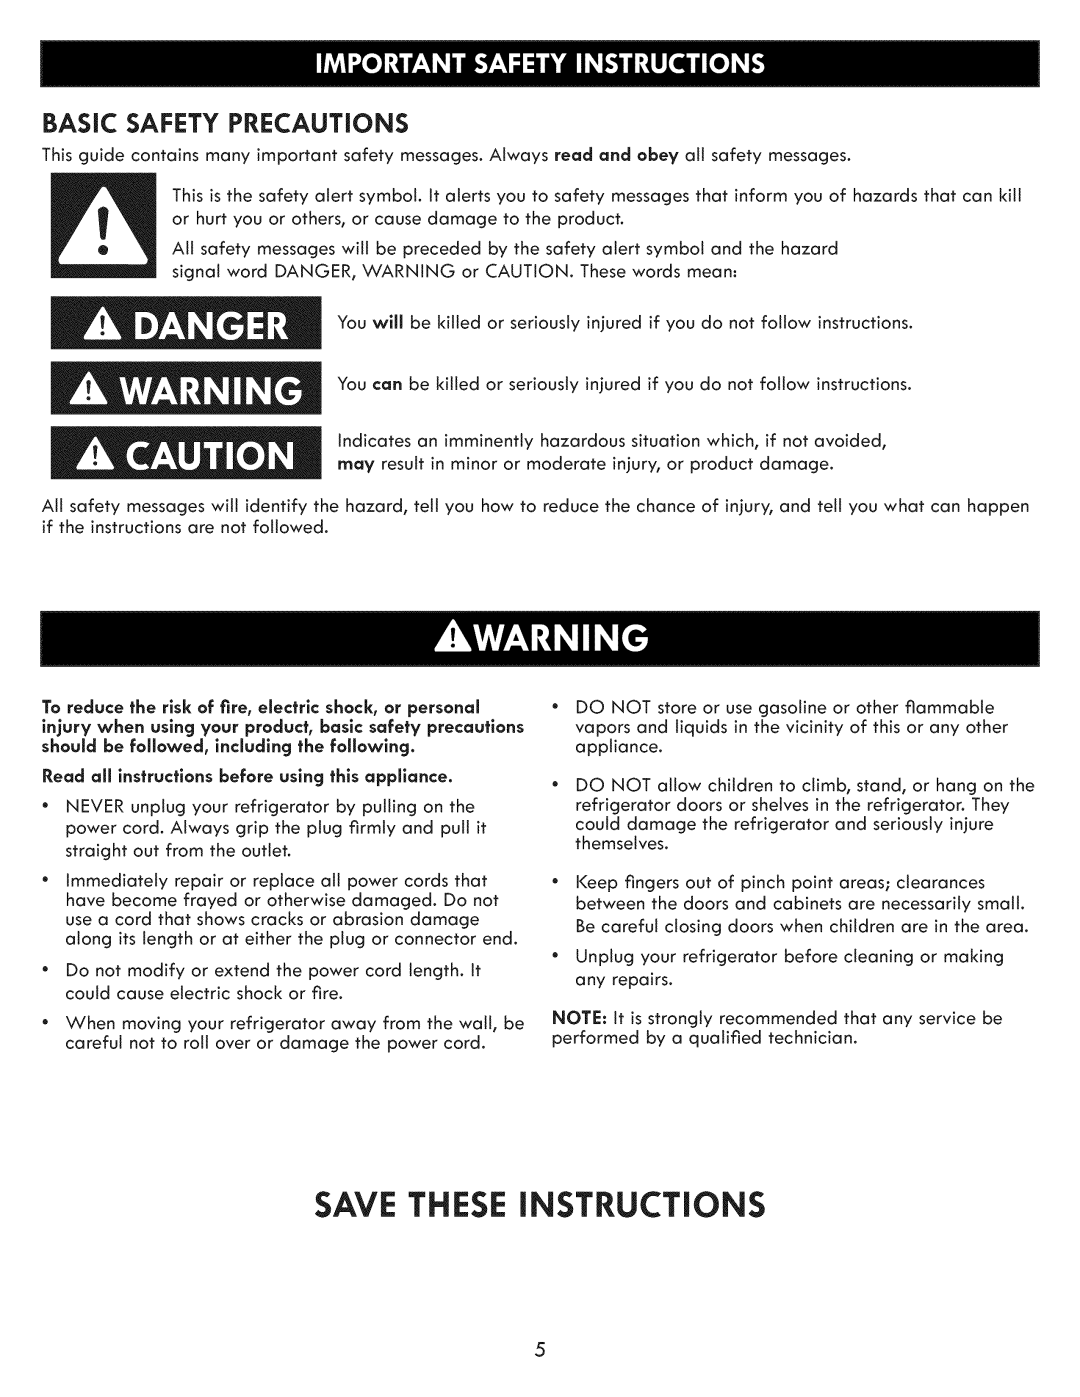 Kenmore 795.7103 manual Basic Safety Precautions, Save These Instructions 